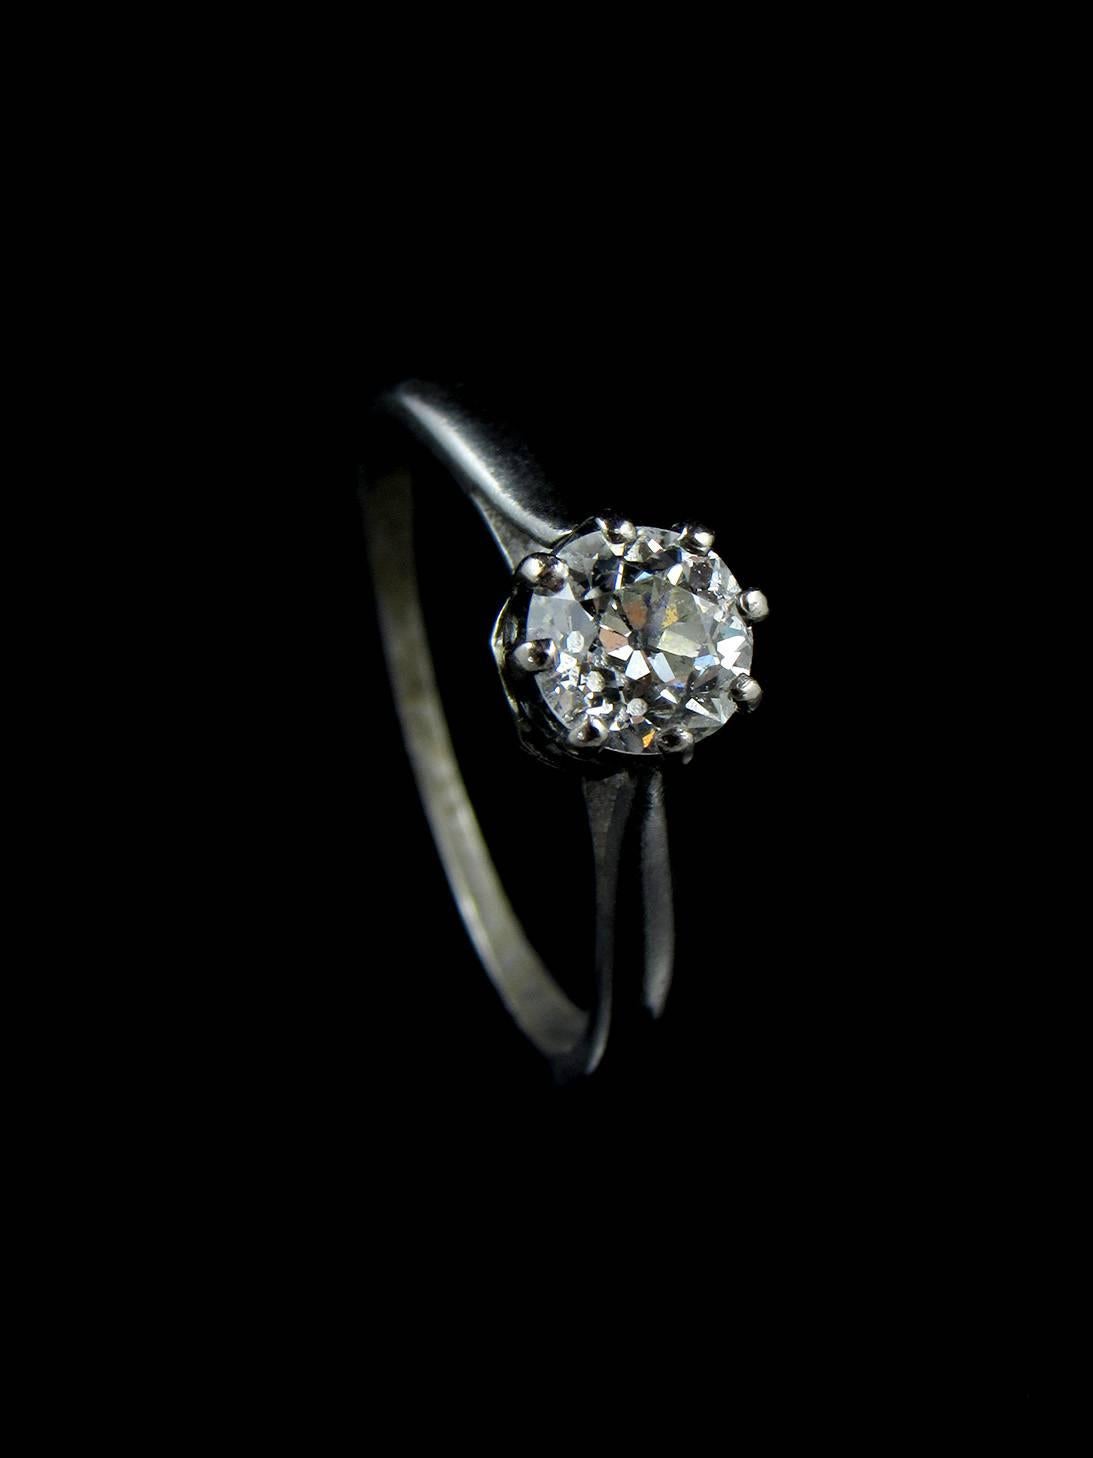 A very delicate diamond ring with a single round cut eight claw set diamond on a solid platinum smooth knife edge shank.

The single stone is the original and weighs approximately 0.5cts. The ring weight is 2.38 grammes.

Recent valuation